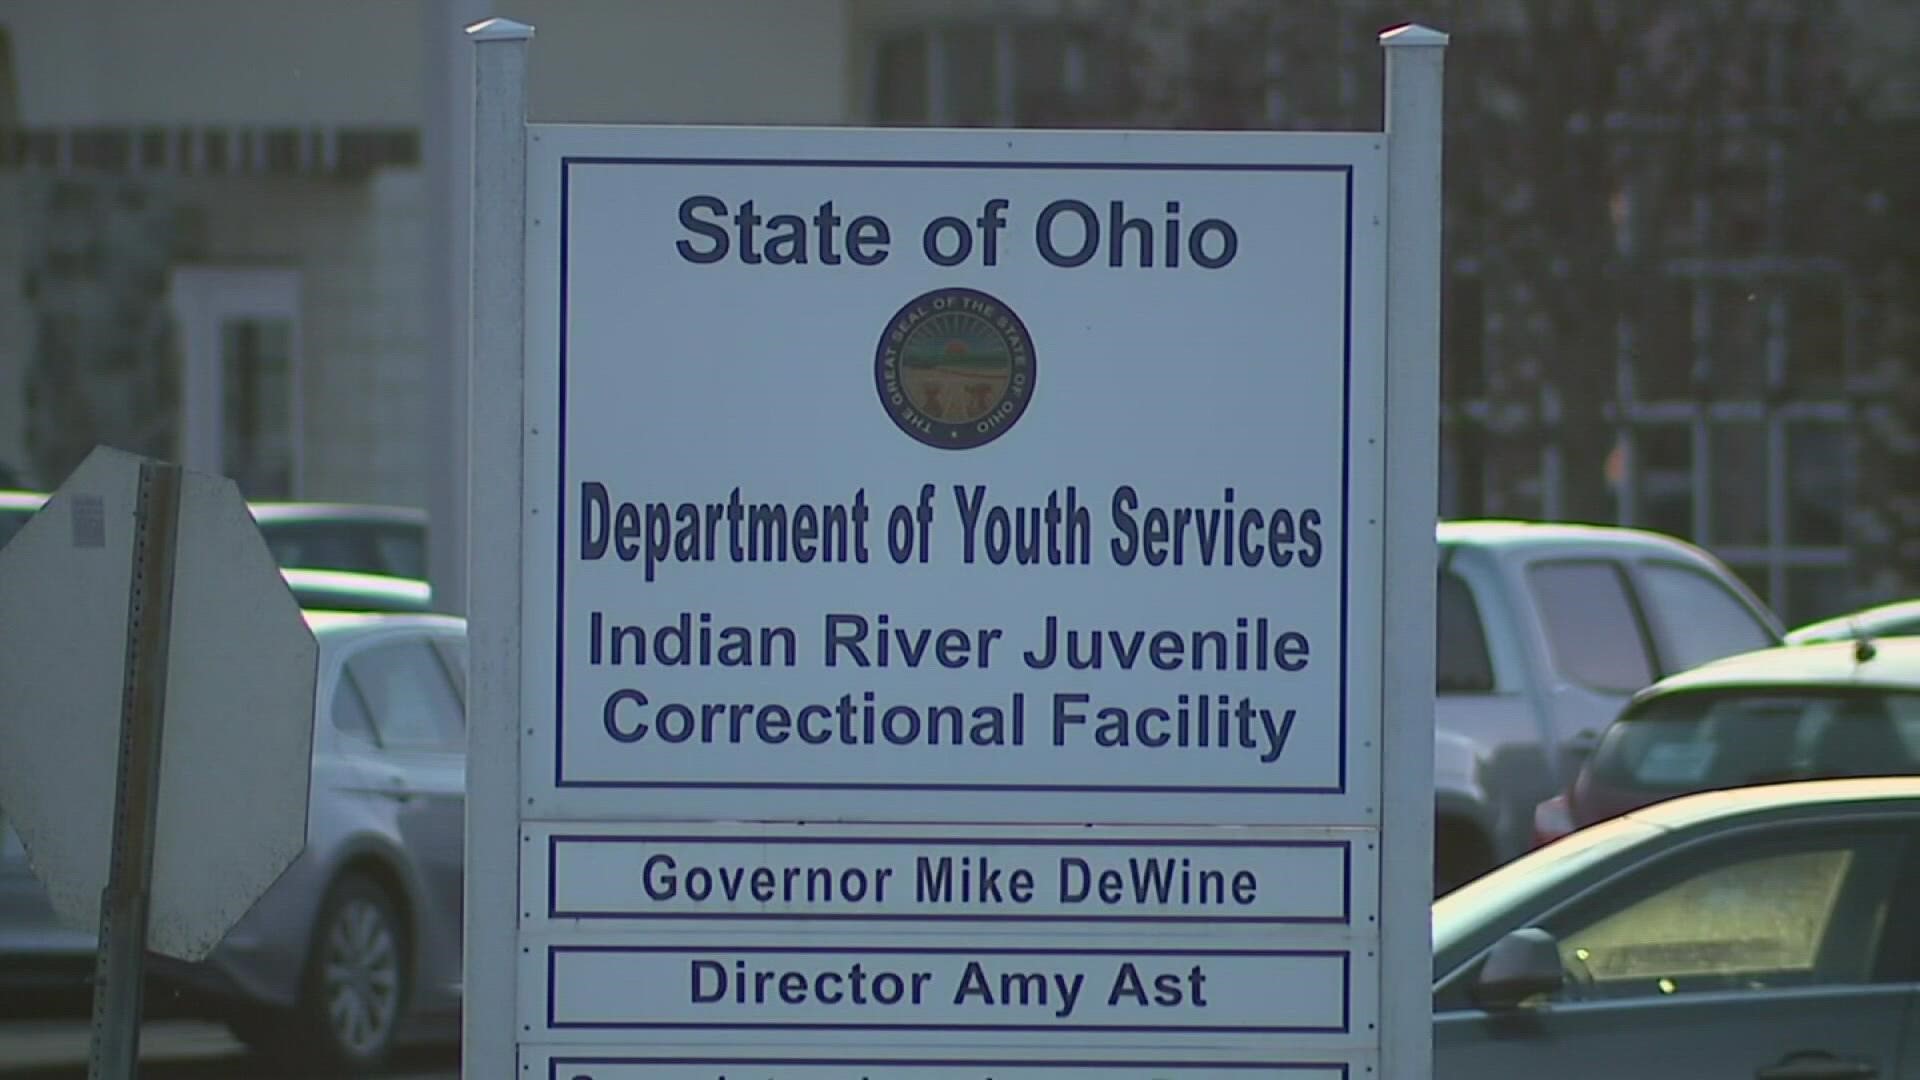 Figures provided by the state show there are currently employee vacancies at all three DYS facilities, which house teens who have been convicted of crimes.